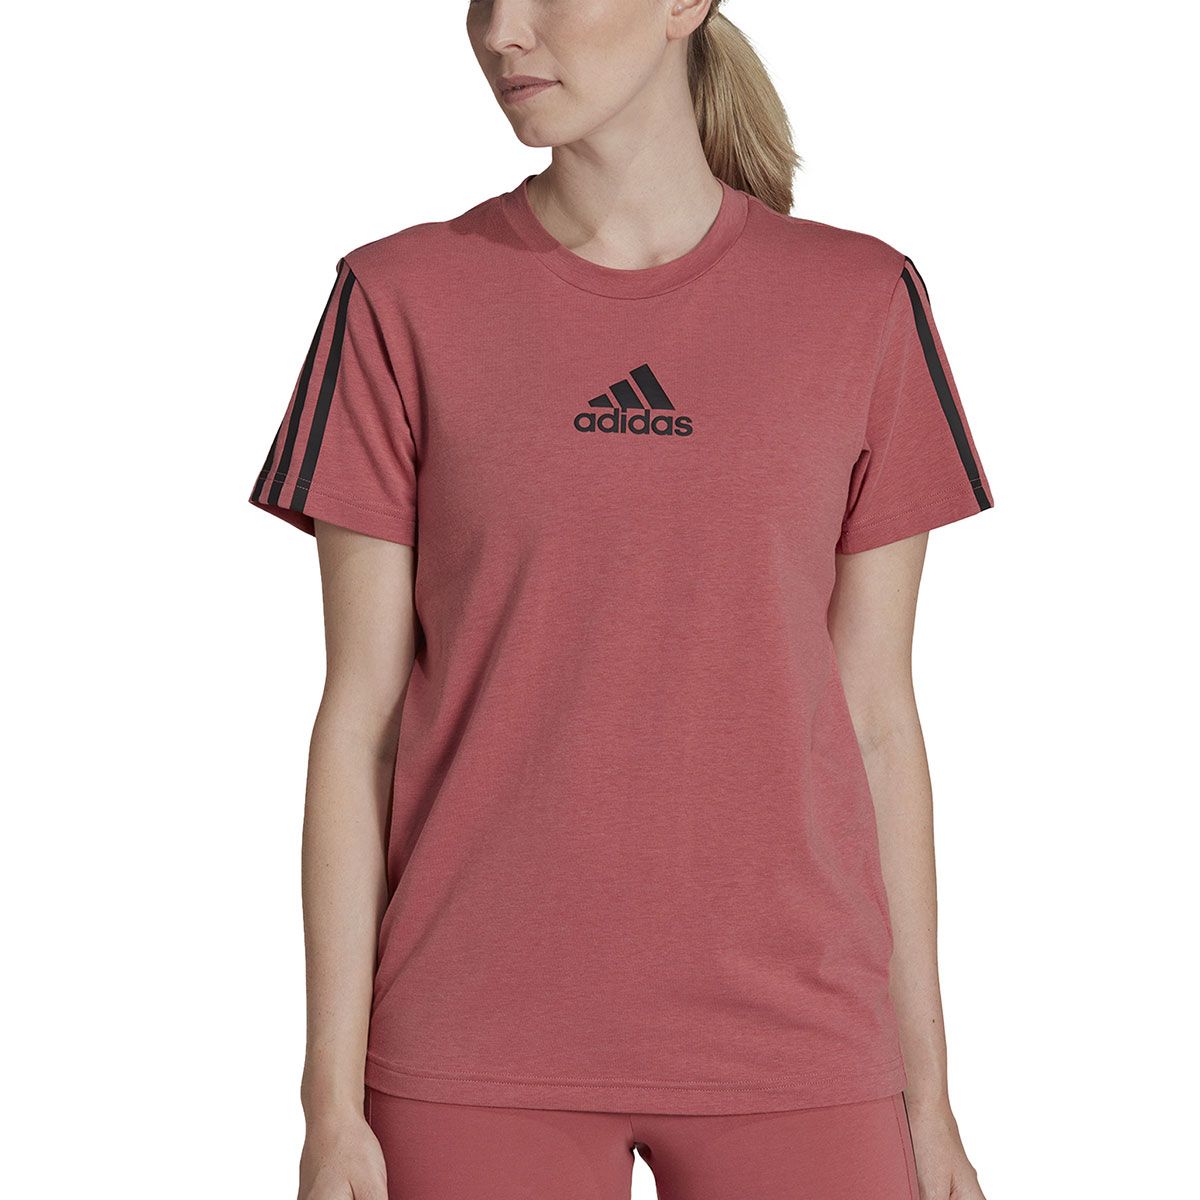 adidas Aeroready Made for Training Women's Cotton-Touch Tee